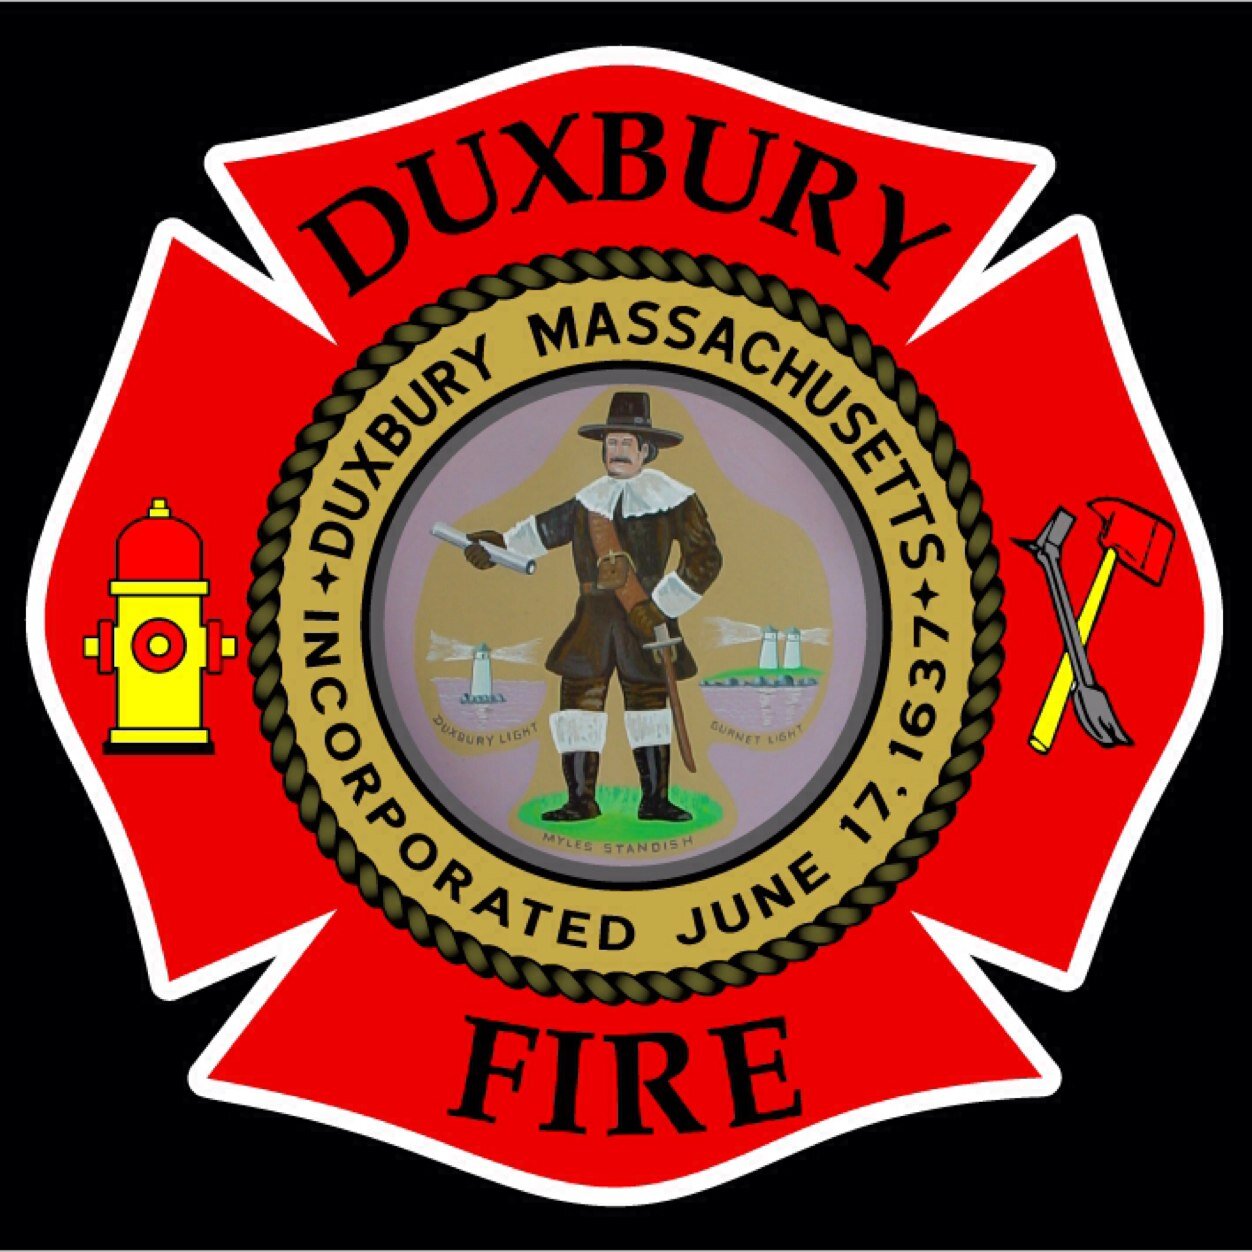 This is the Official Town of Duxbury Twitter page for Fire and Emergency Management